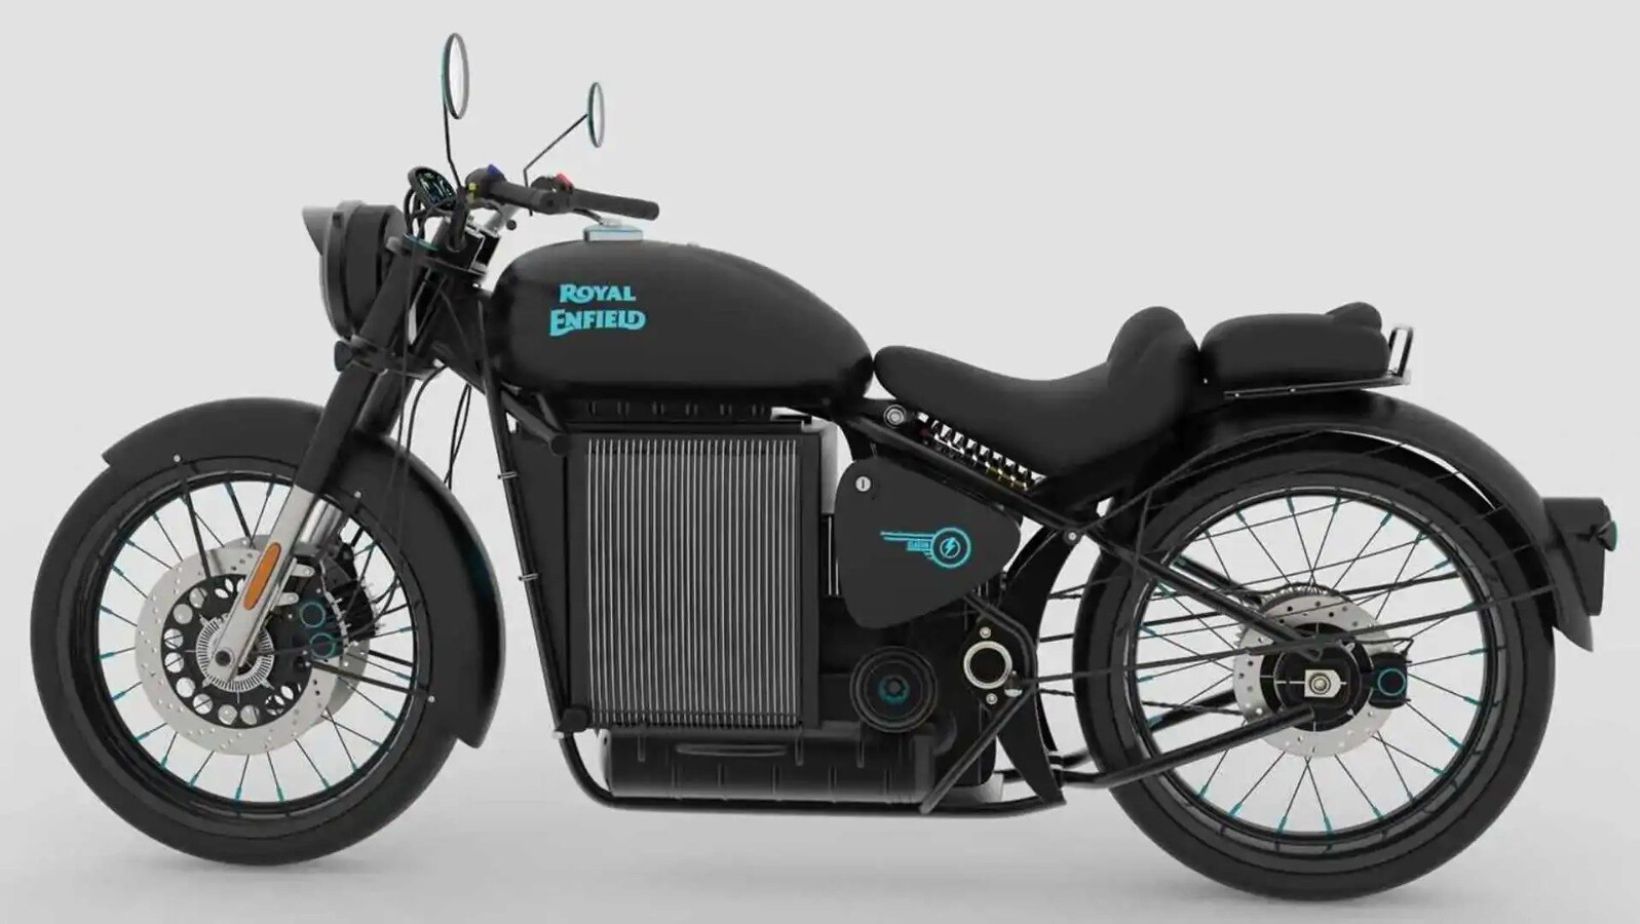 Royal Enfield Electric Bike: Price, Top Speed, Bike Parts, and Review